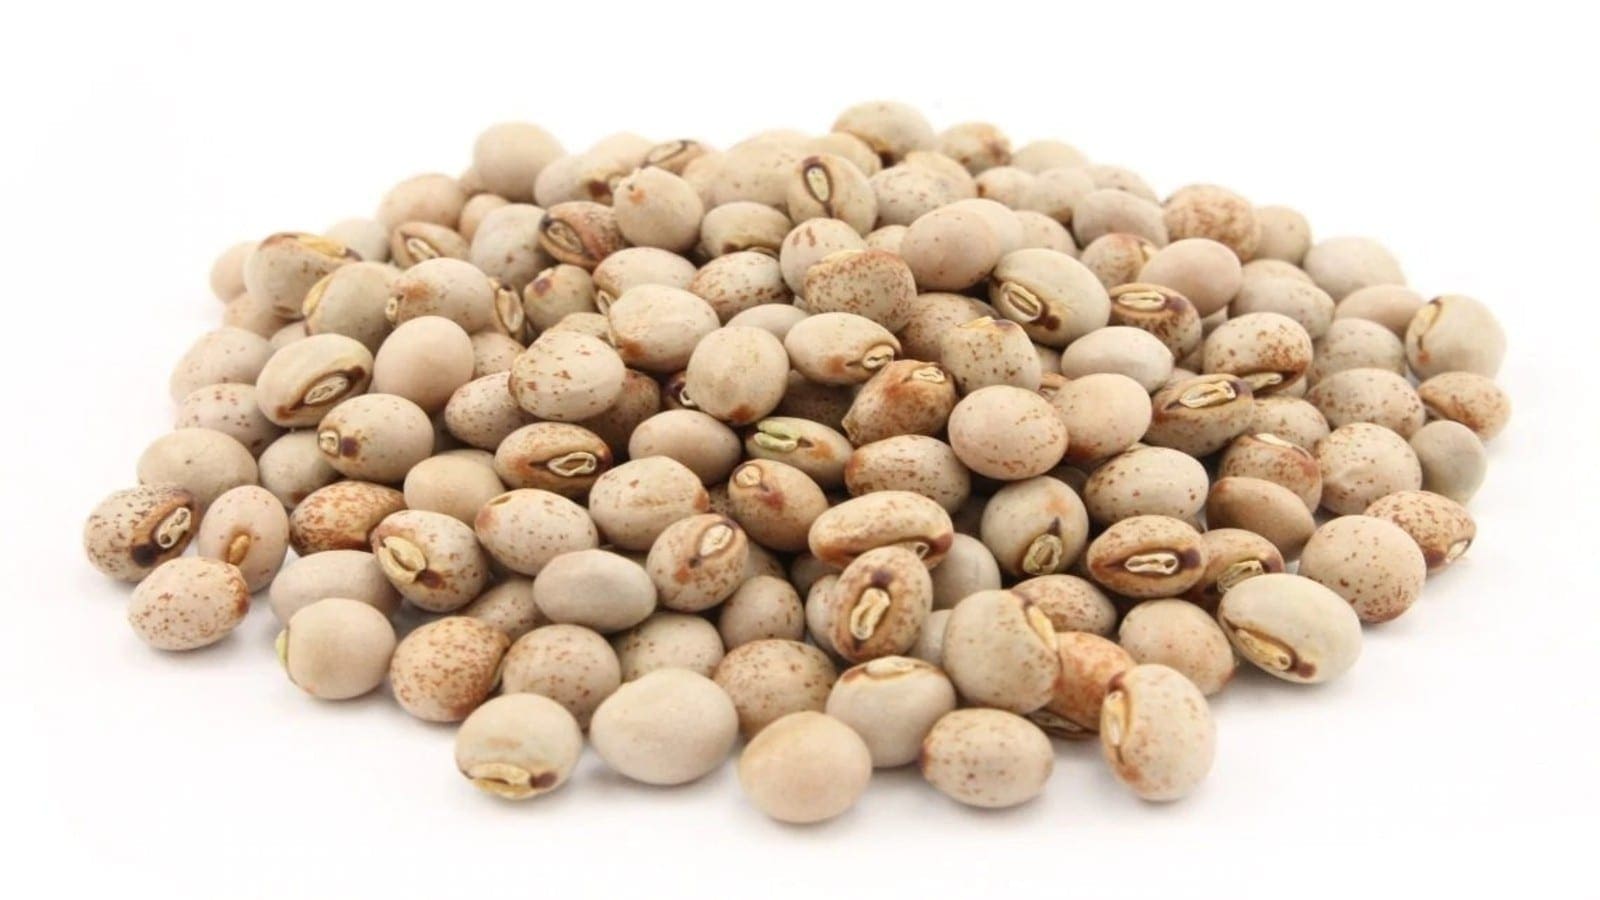 Mozambique to exports 200,000 tonnes of pigeon peas to India half of the set import quota